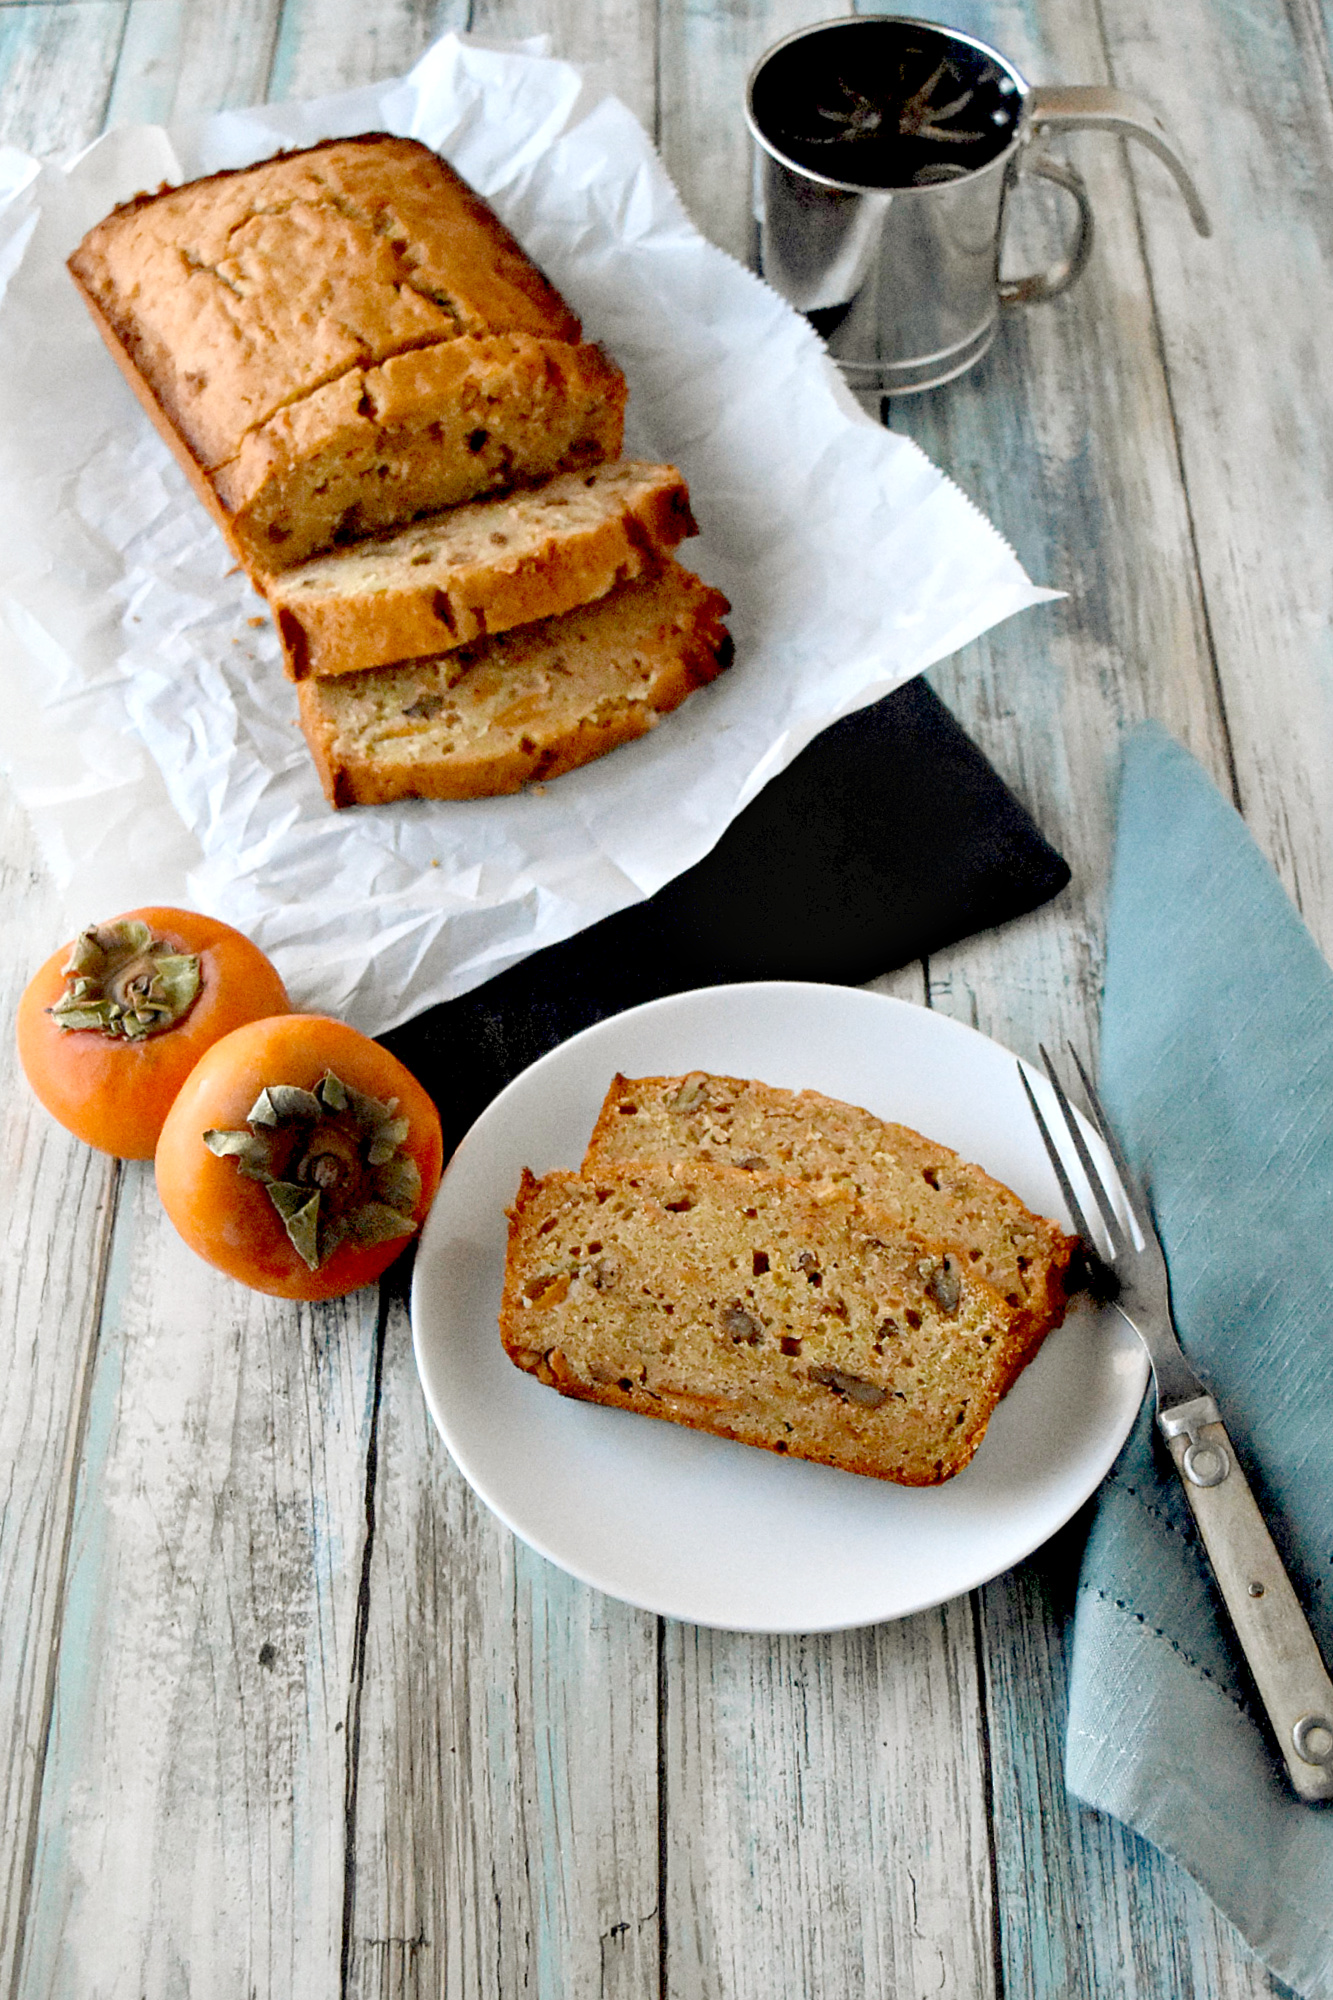 Bourbon Pecan Persimmon Bread has a hint of bourbon and persimmon packed with crunchy pecans. It’s moist, delicious, and packed full of deliciously ripe persimmons. #FamilyBakingChallenge #OurFamilyTable